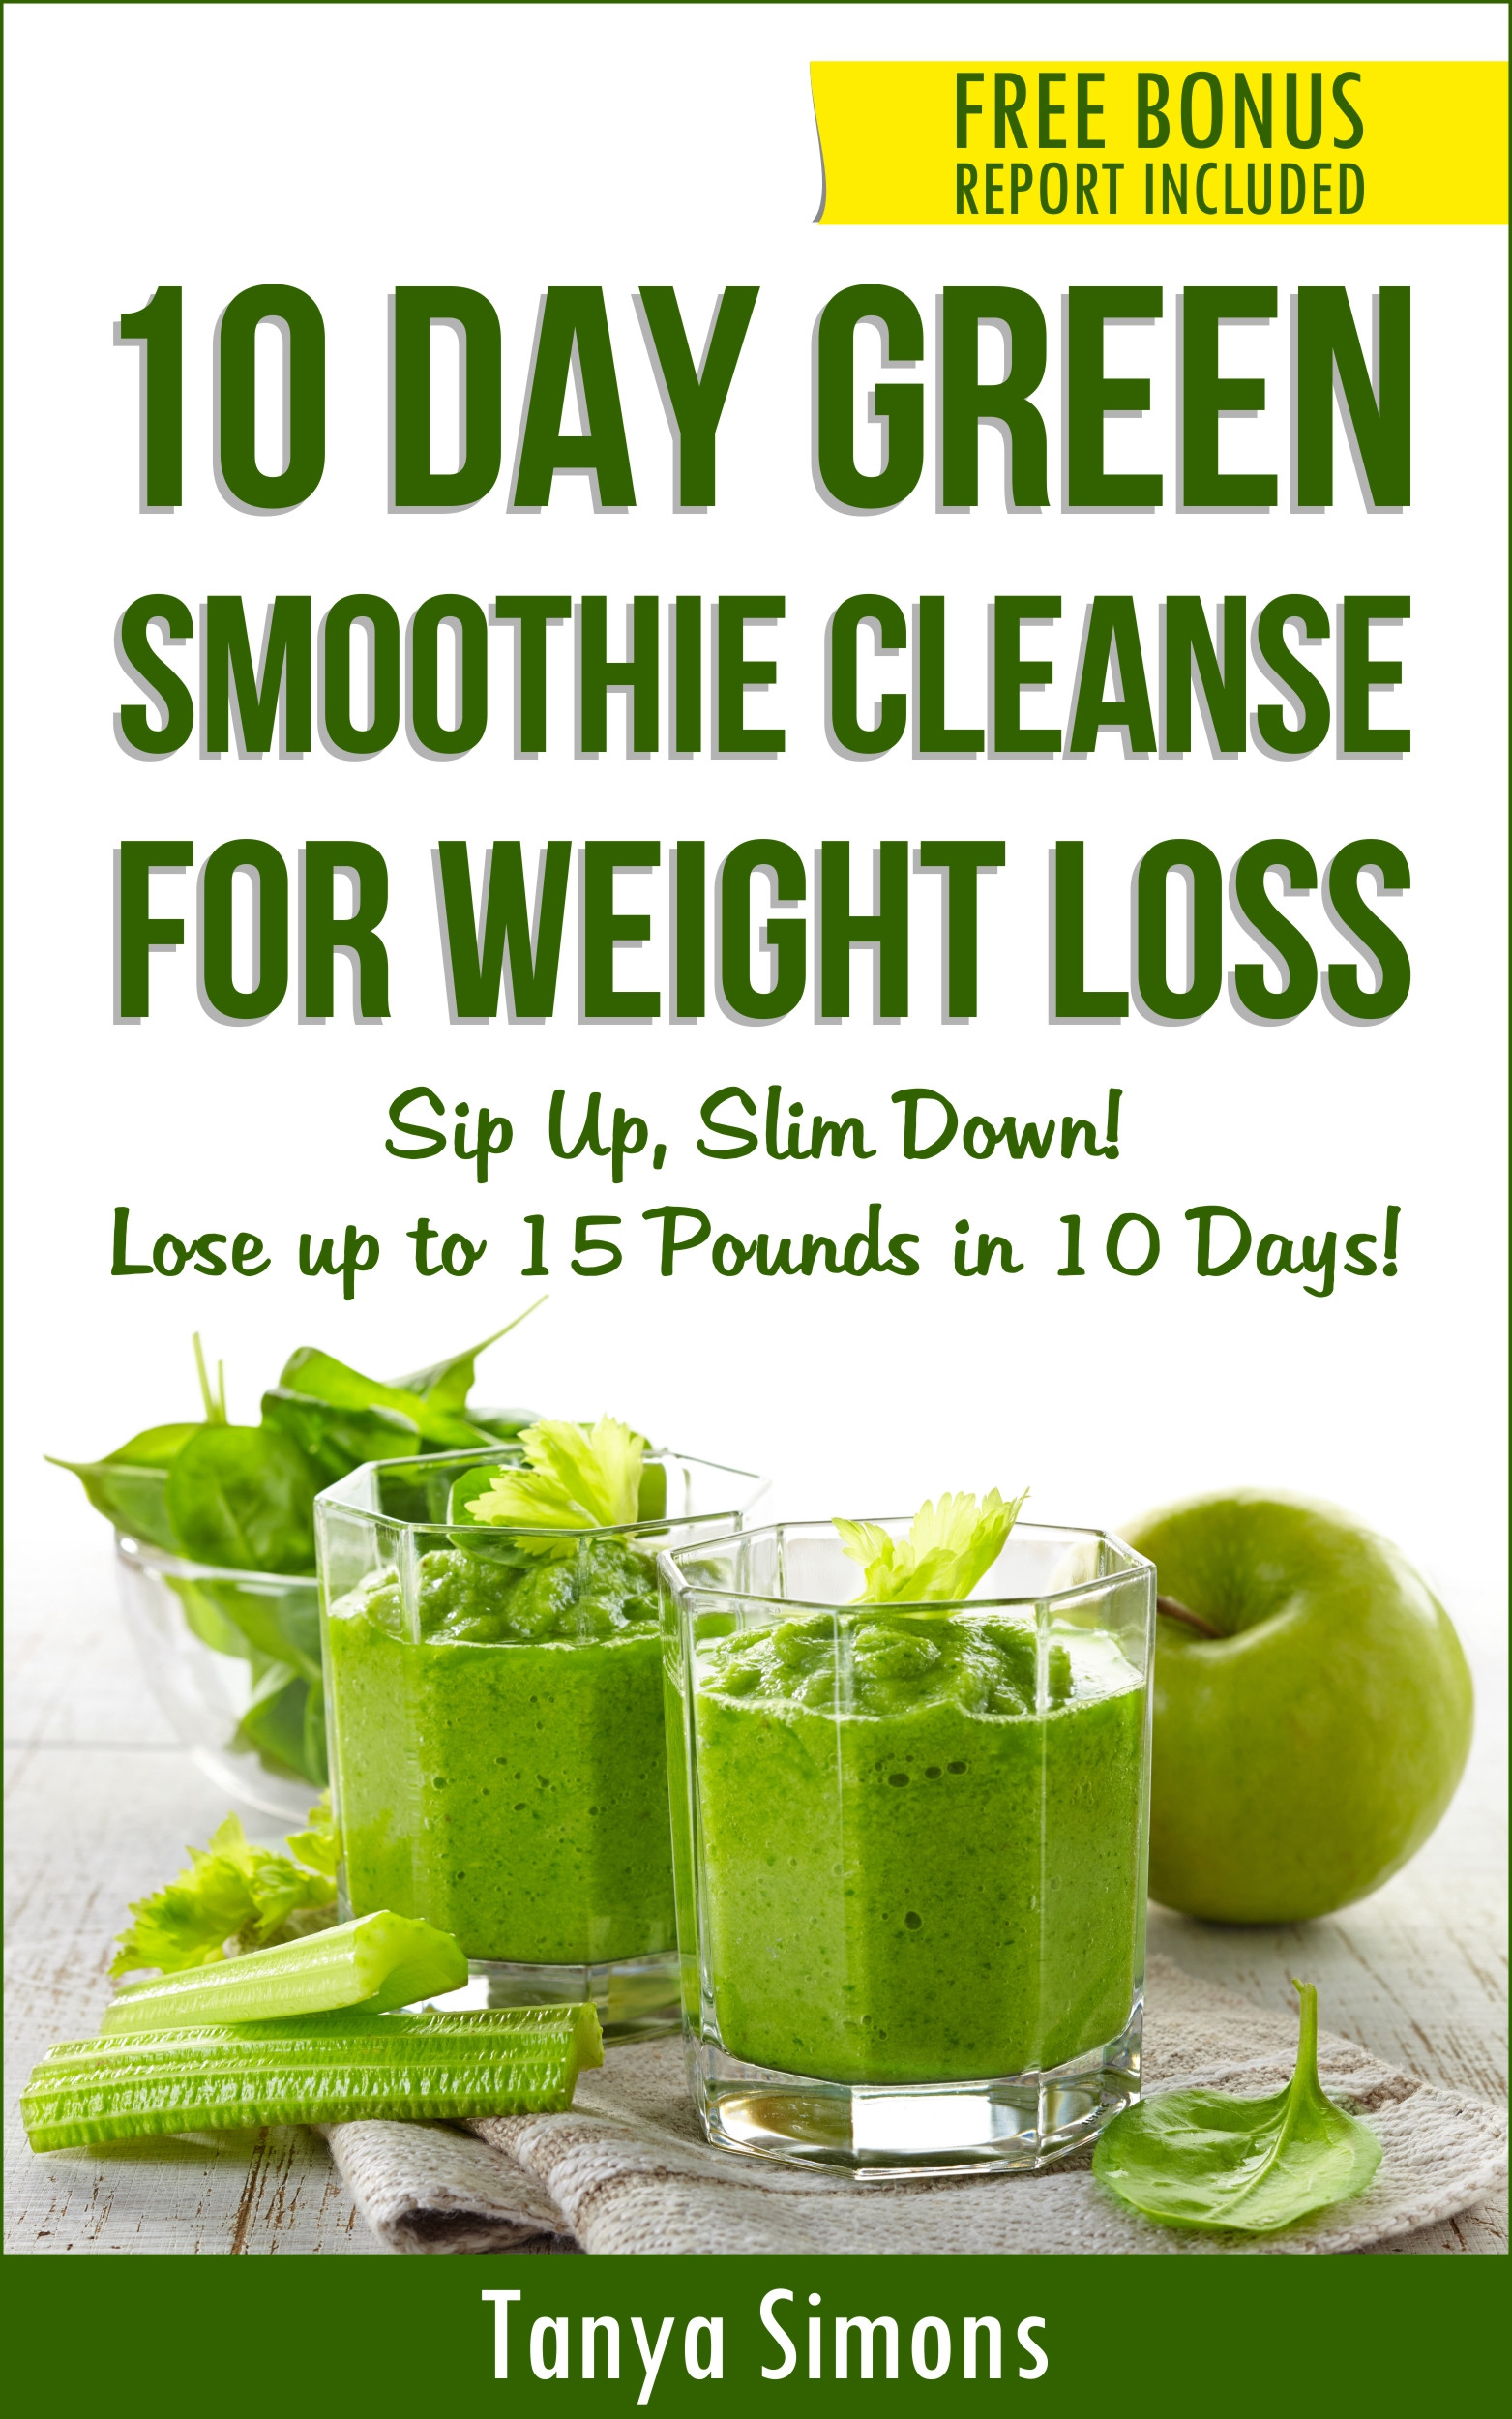 Green Smoothie Recipes Weight Loss
 10 Day Green Smoothie Cleanse Lose 15lbs with 10 Day